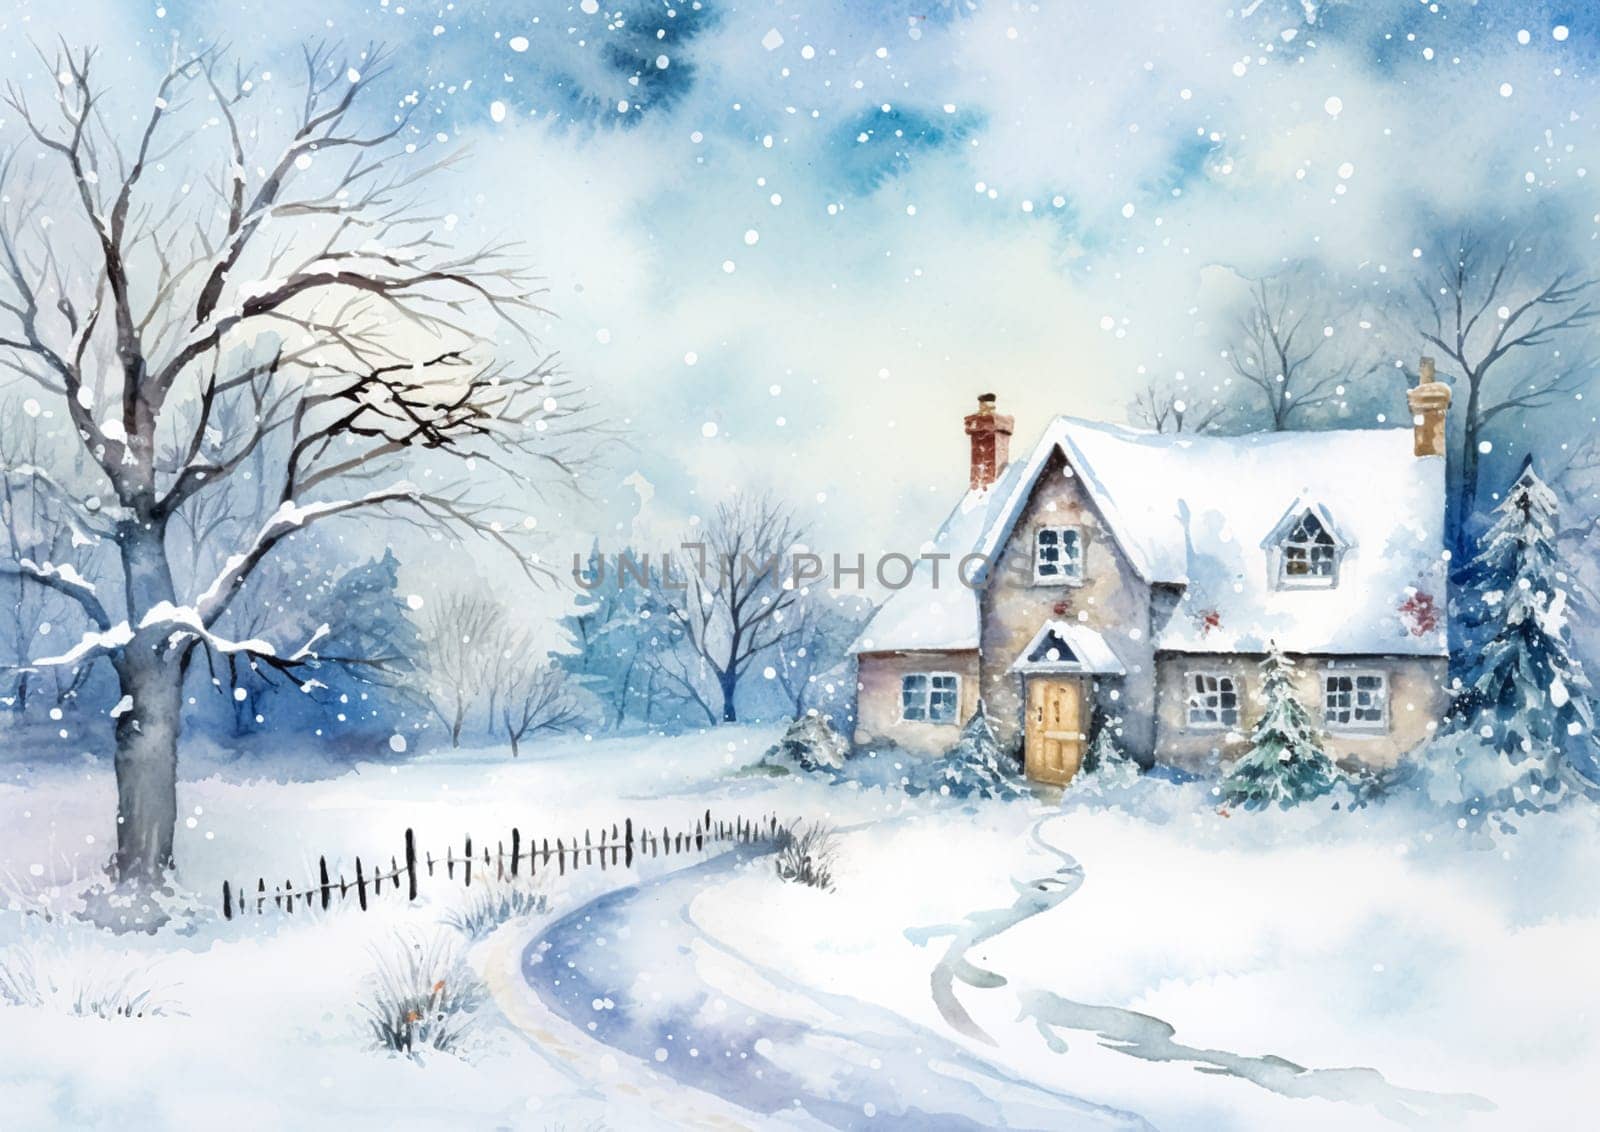 Merry Christmas and Happy Holidays, watercolour printable art print, English countryside cottage as snow winter holiday Christmas card, thank you and diy greeting card design, country style by Anneleven